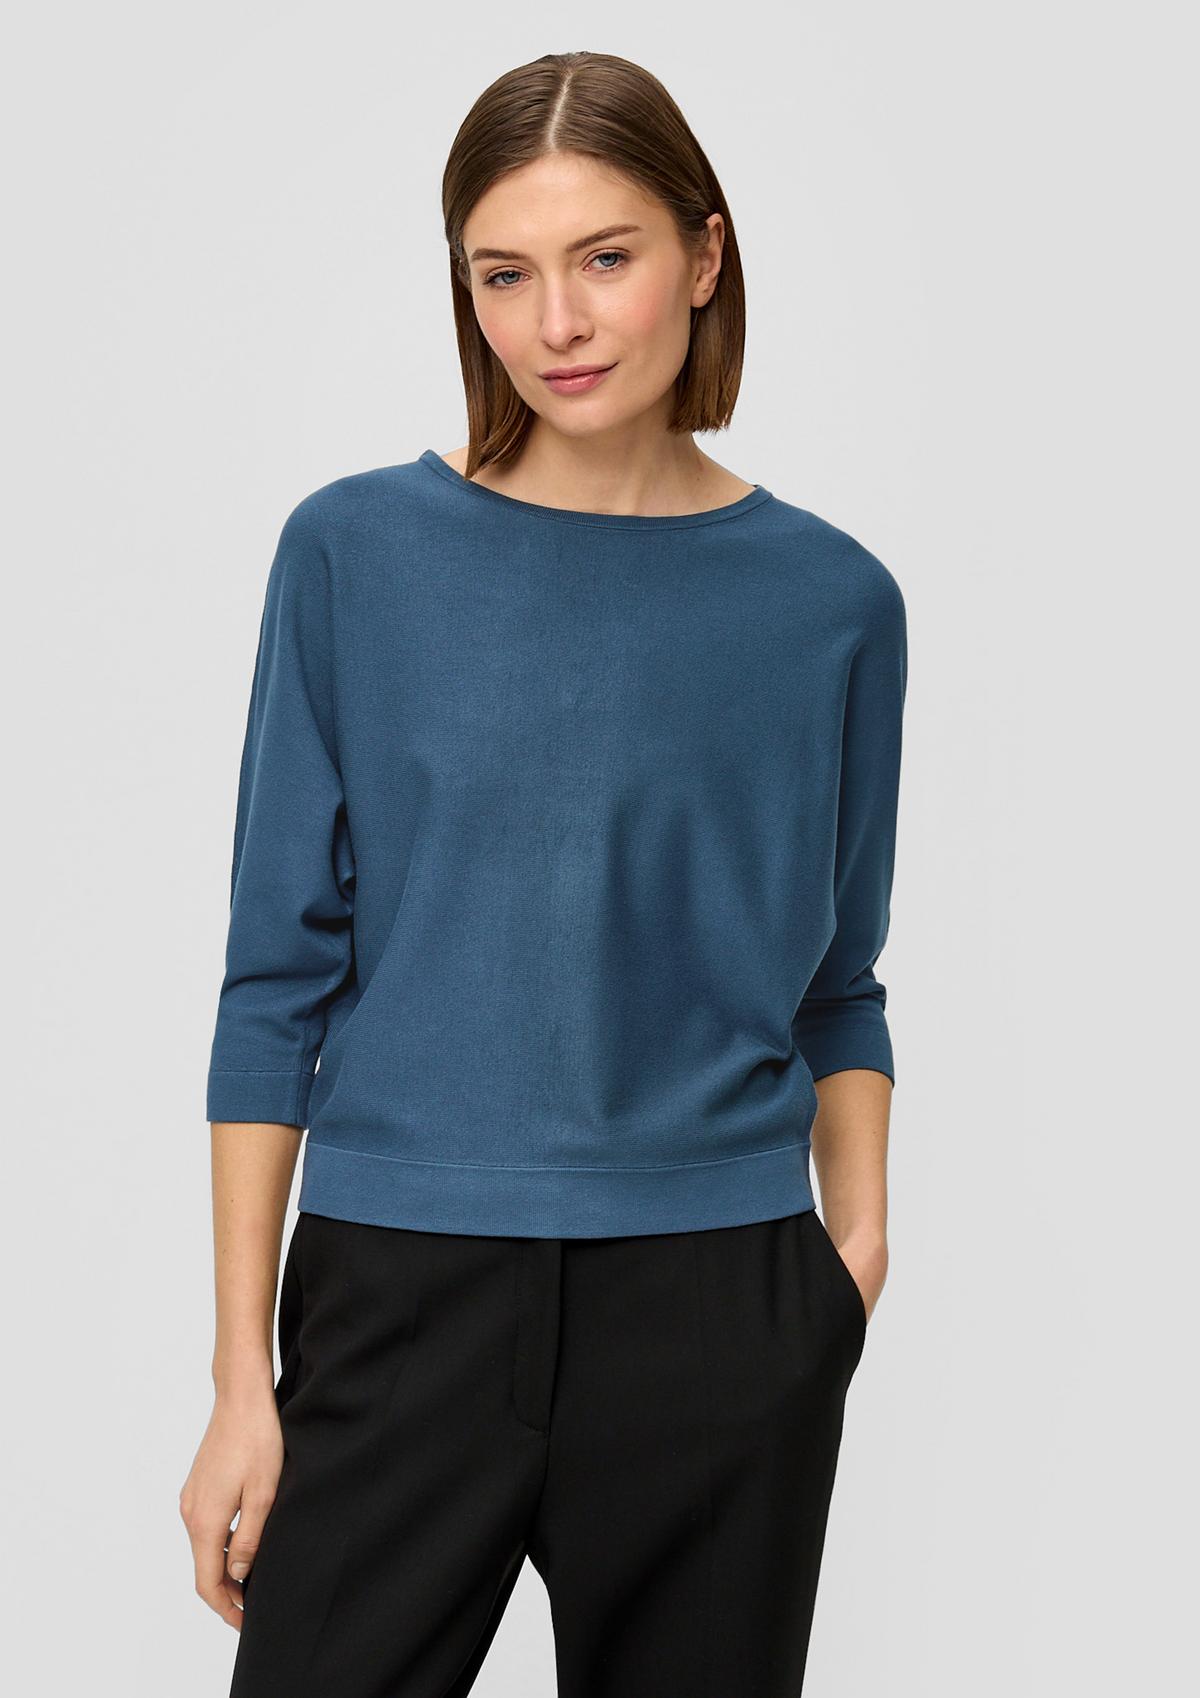 Jumpers & Cardigans for Women